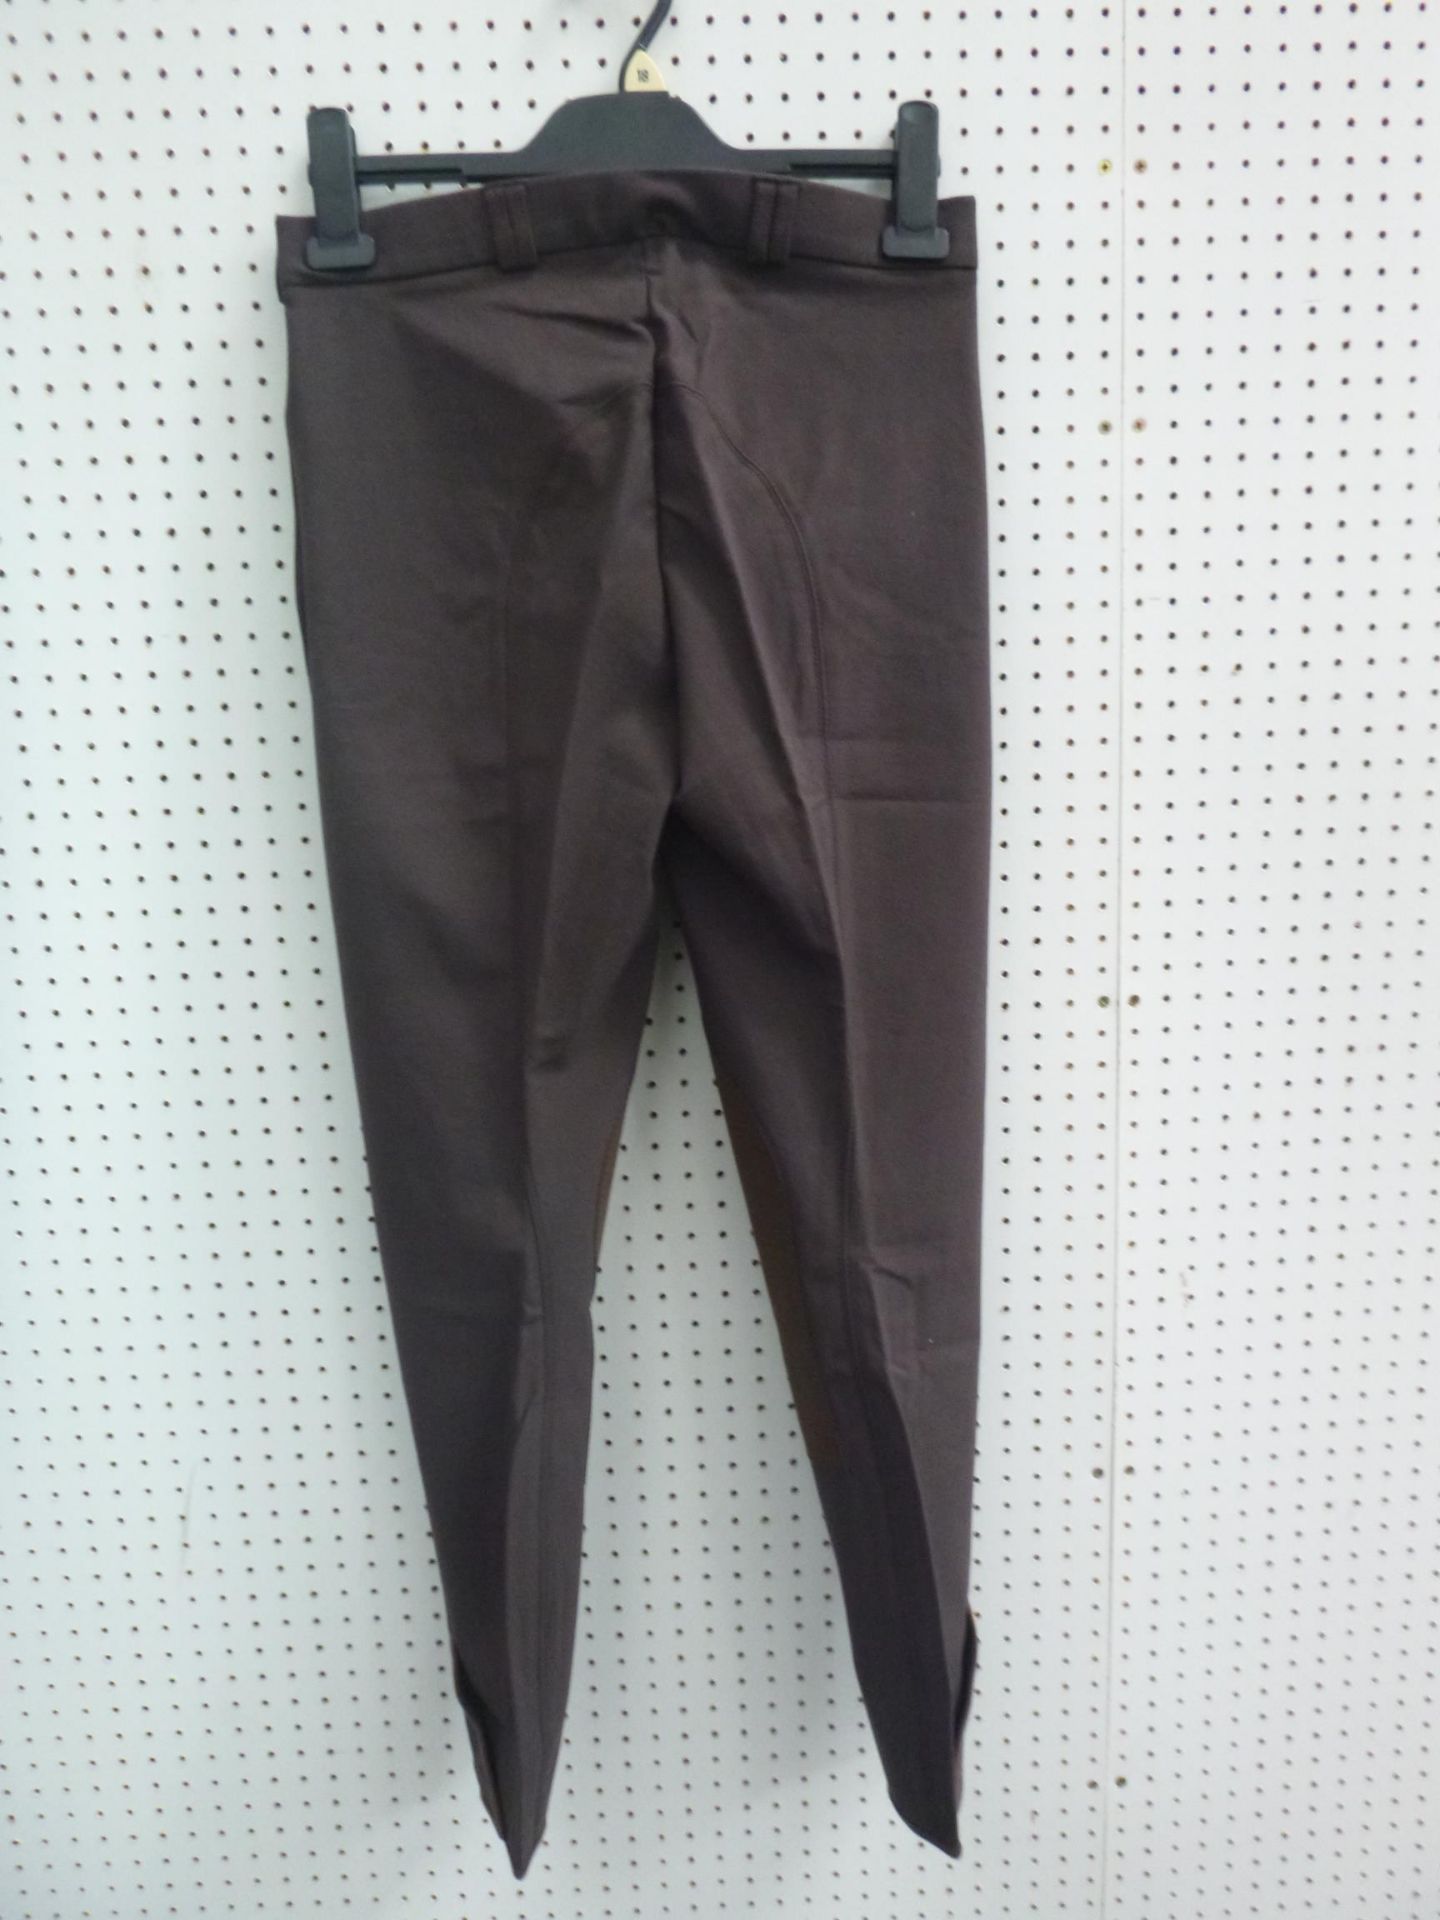 * Two Pairs of New Bridleway Ladies Woven Cotton/Nylon Breeches in Brown one size 26R the other - Bild 2 aus 2